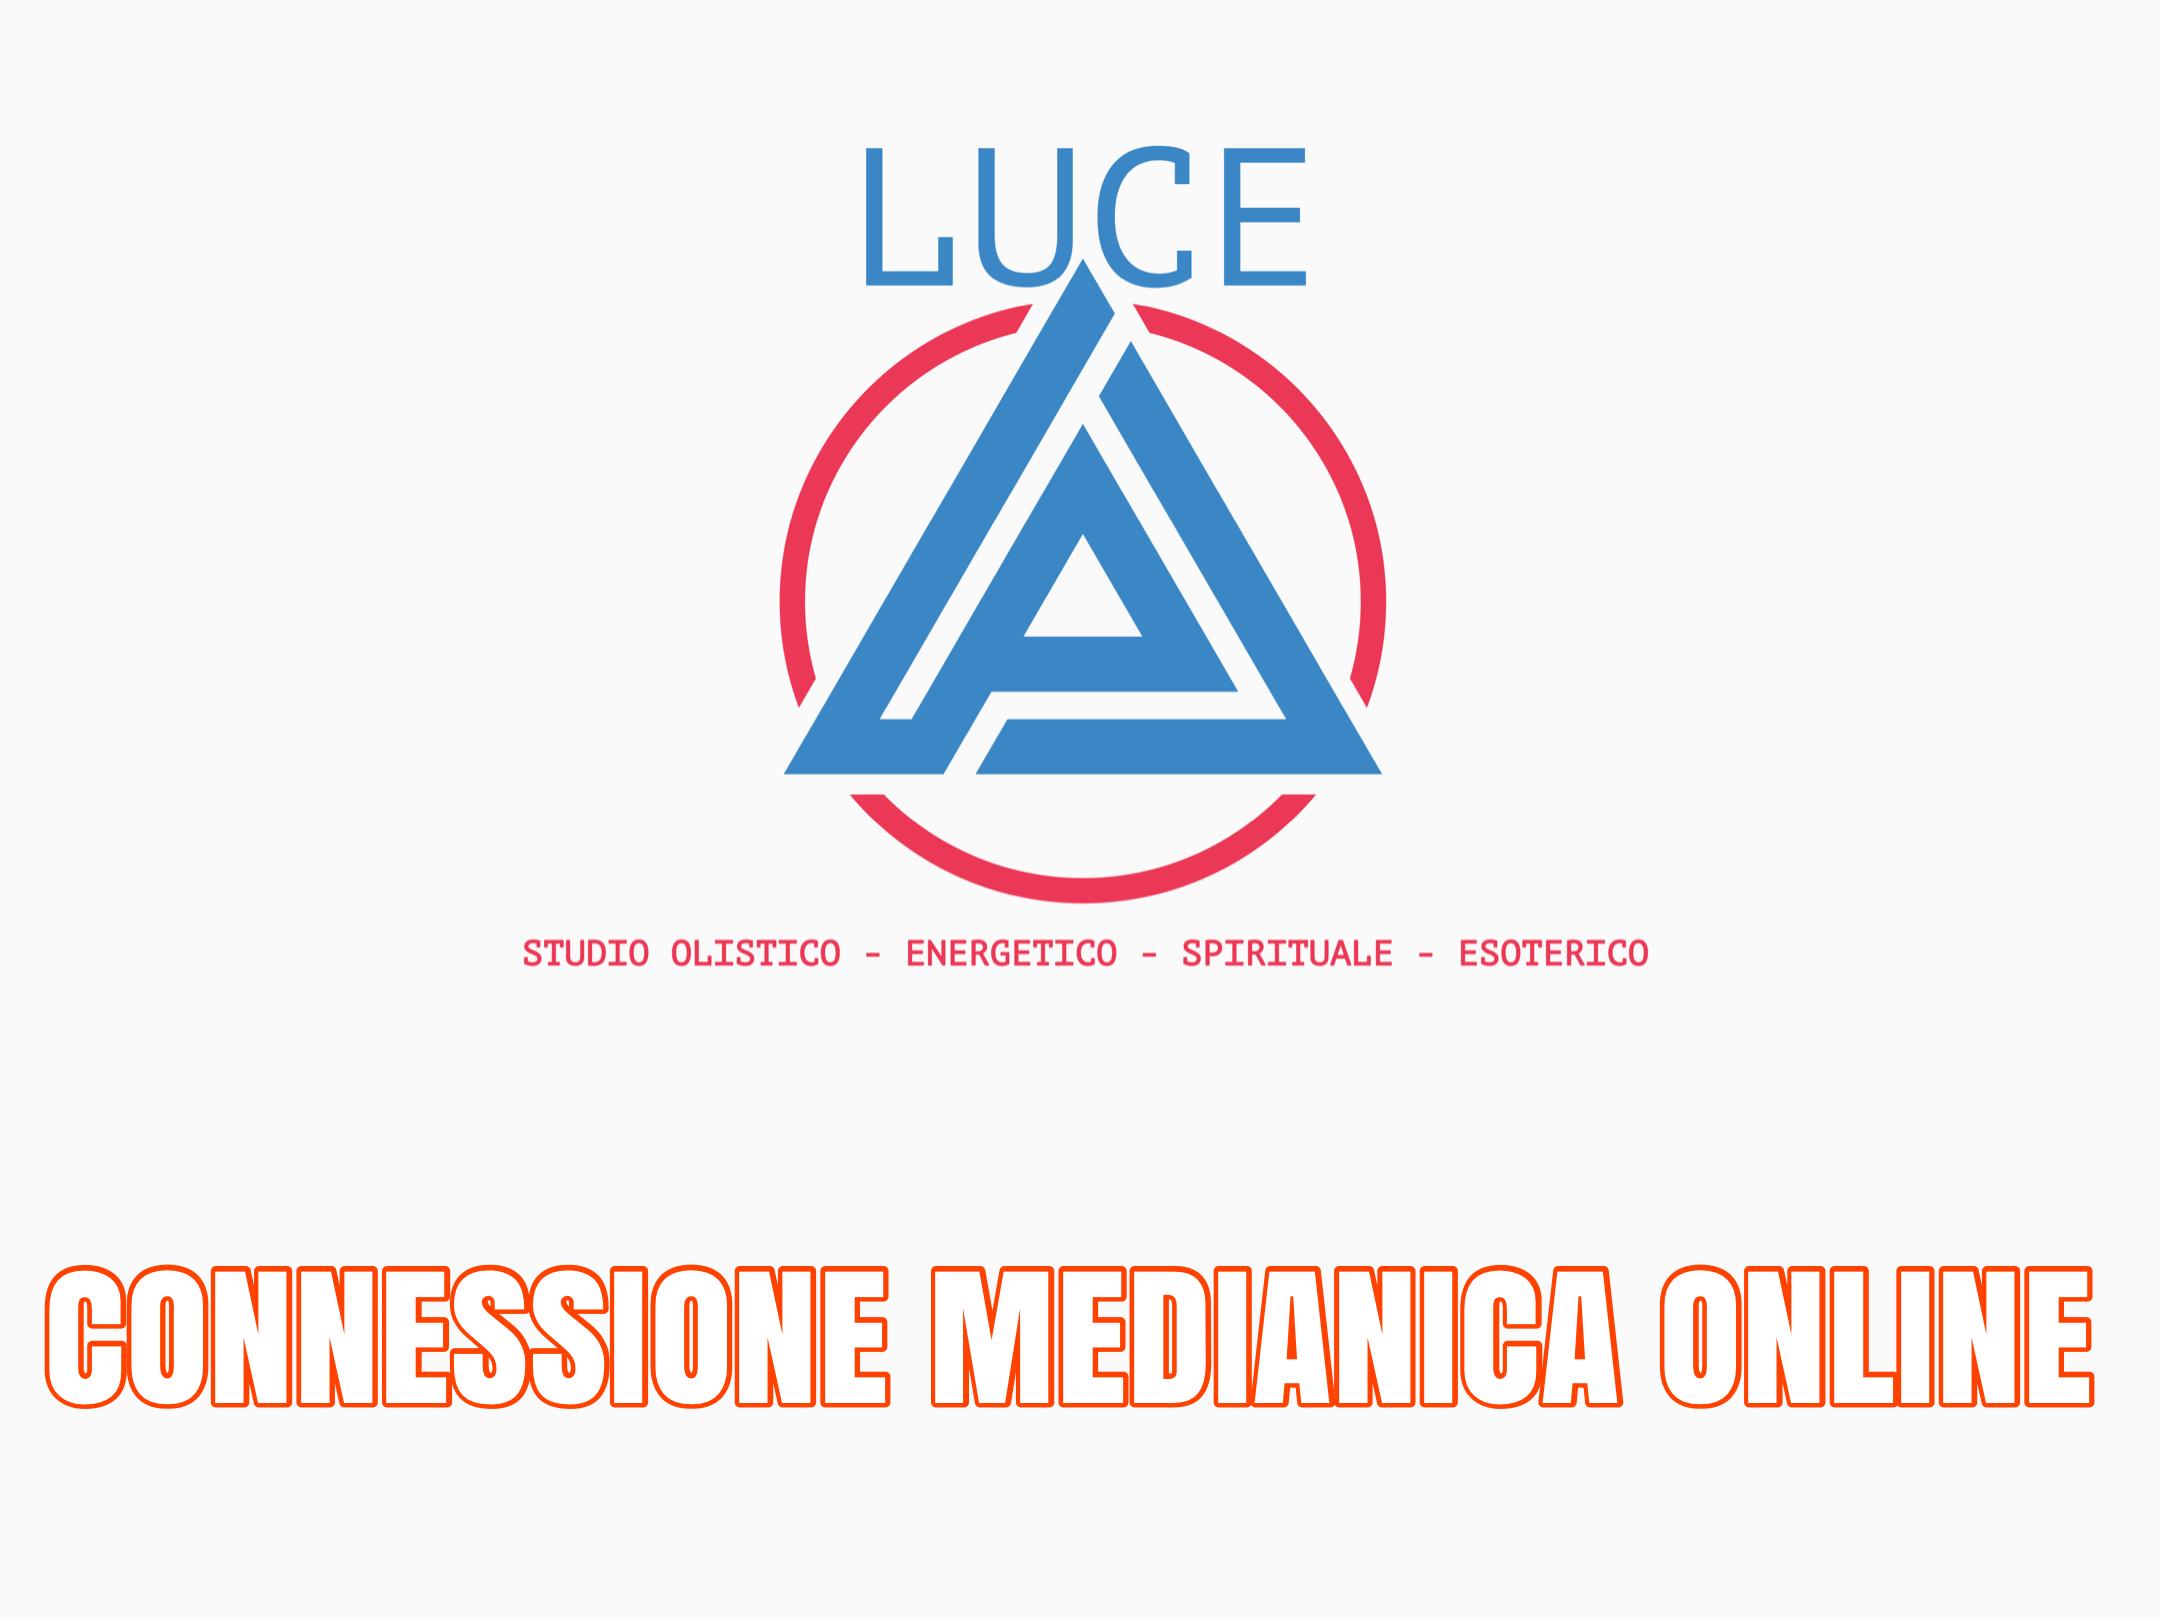 CONNESSIONE MEDIANICA ONLINE